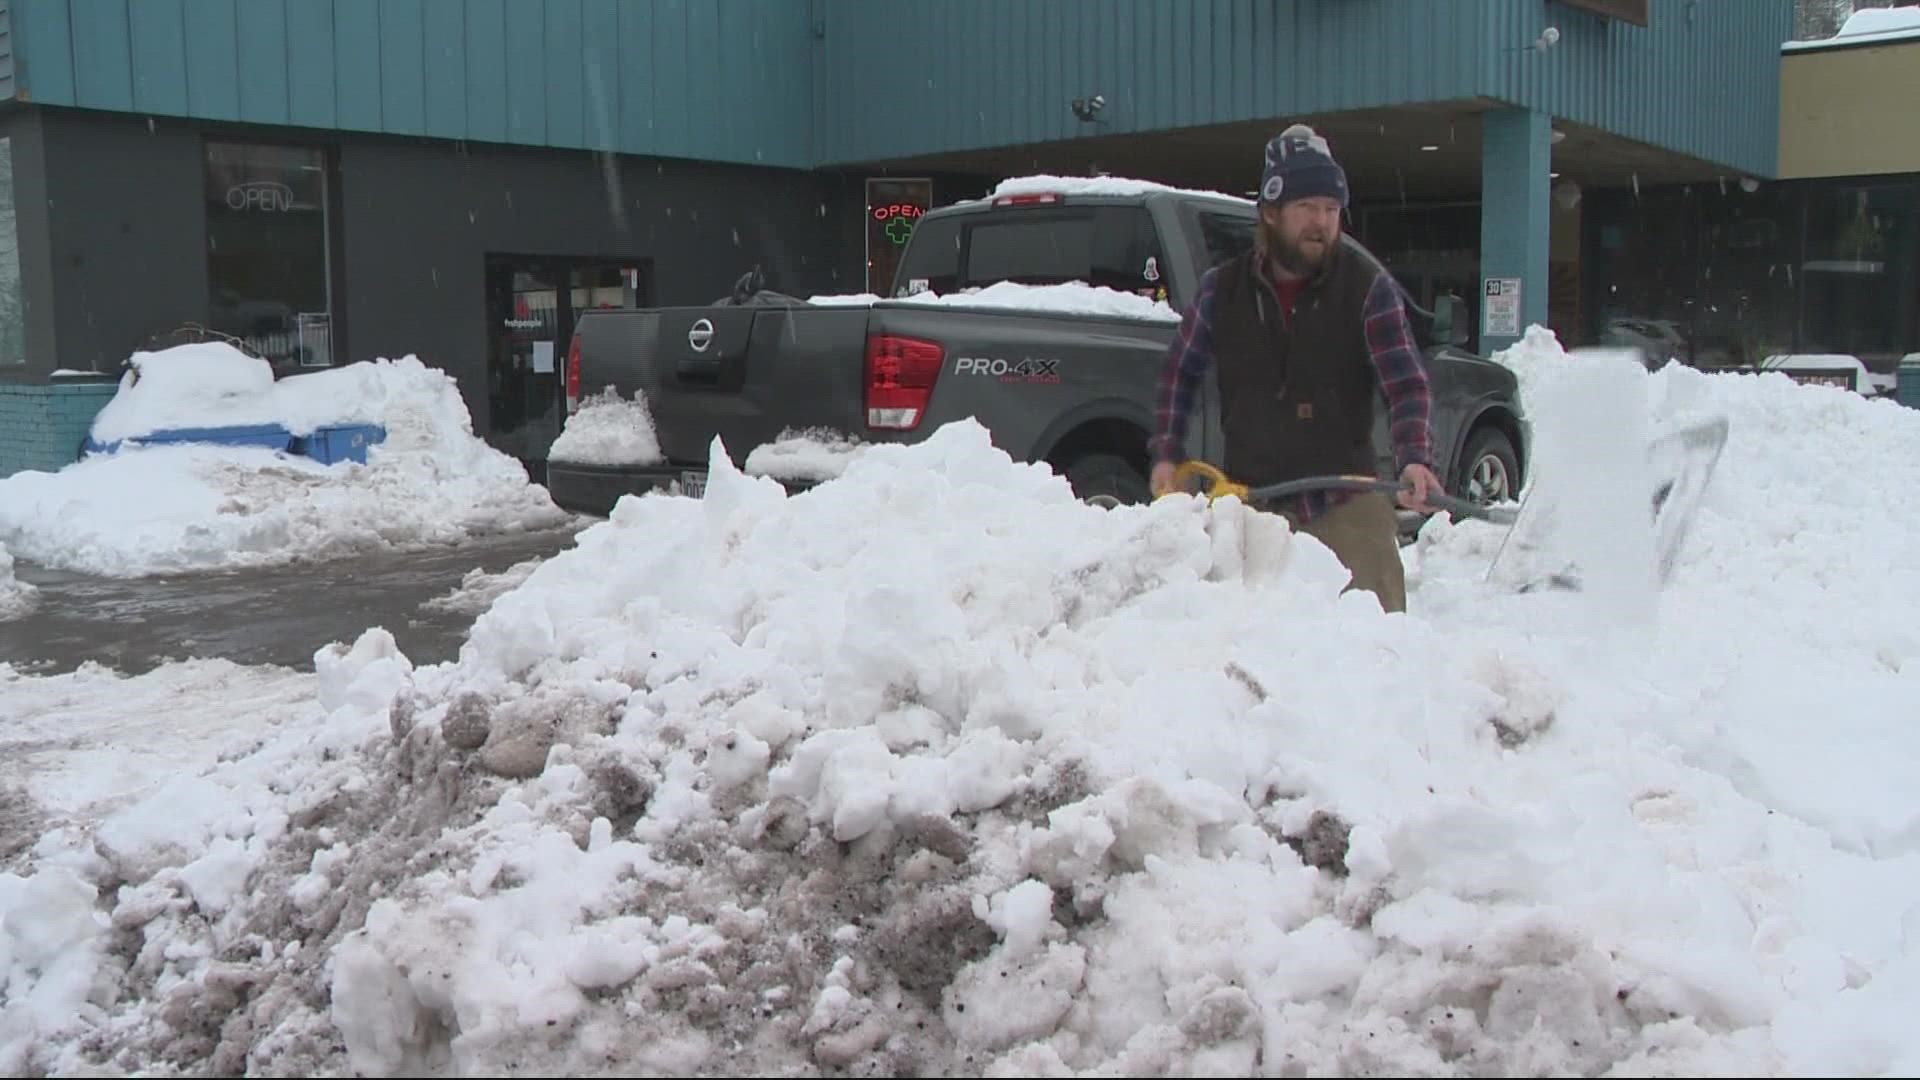 In some places in Hood River, there was more than a foot of snow.